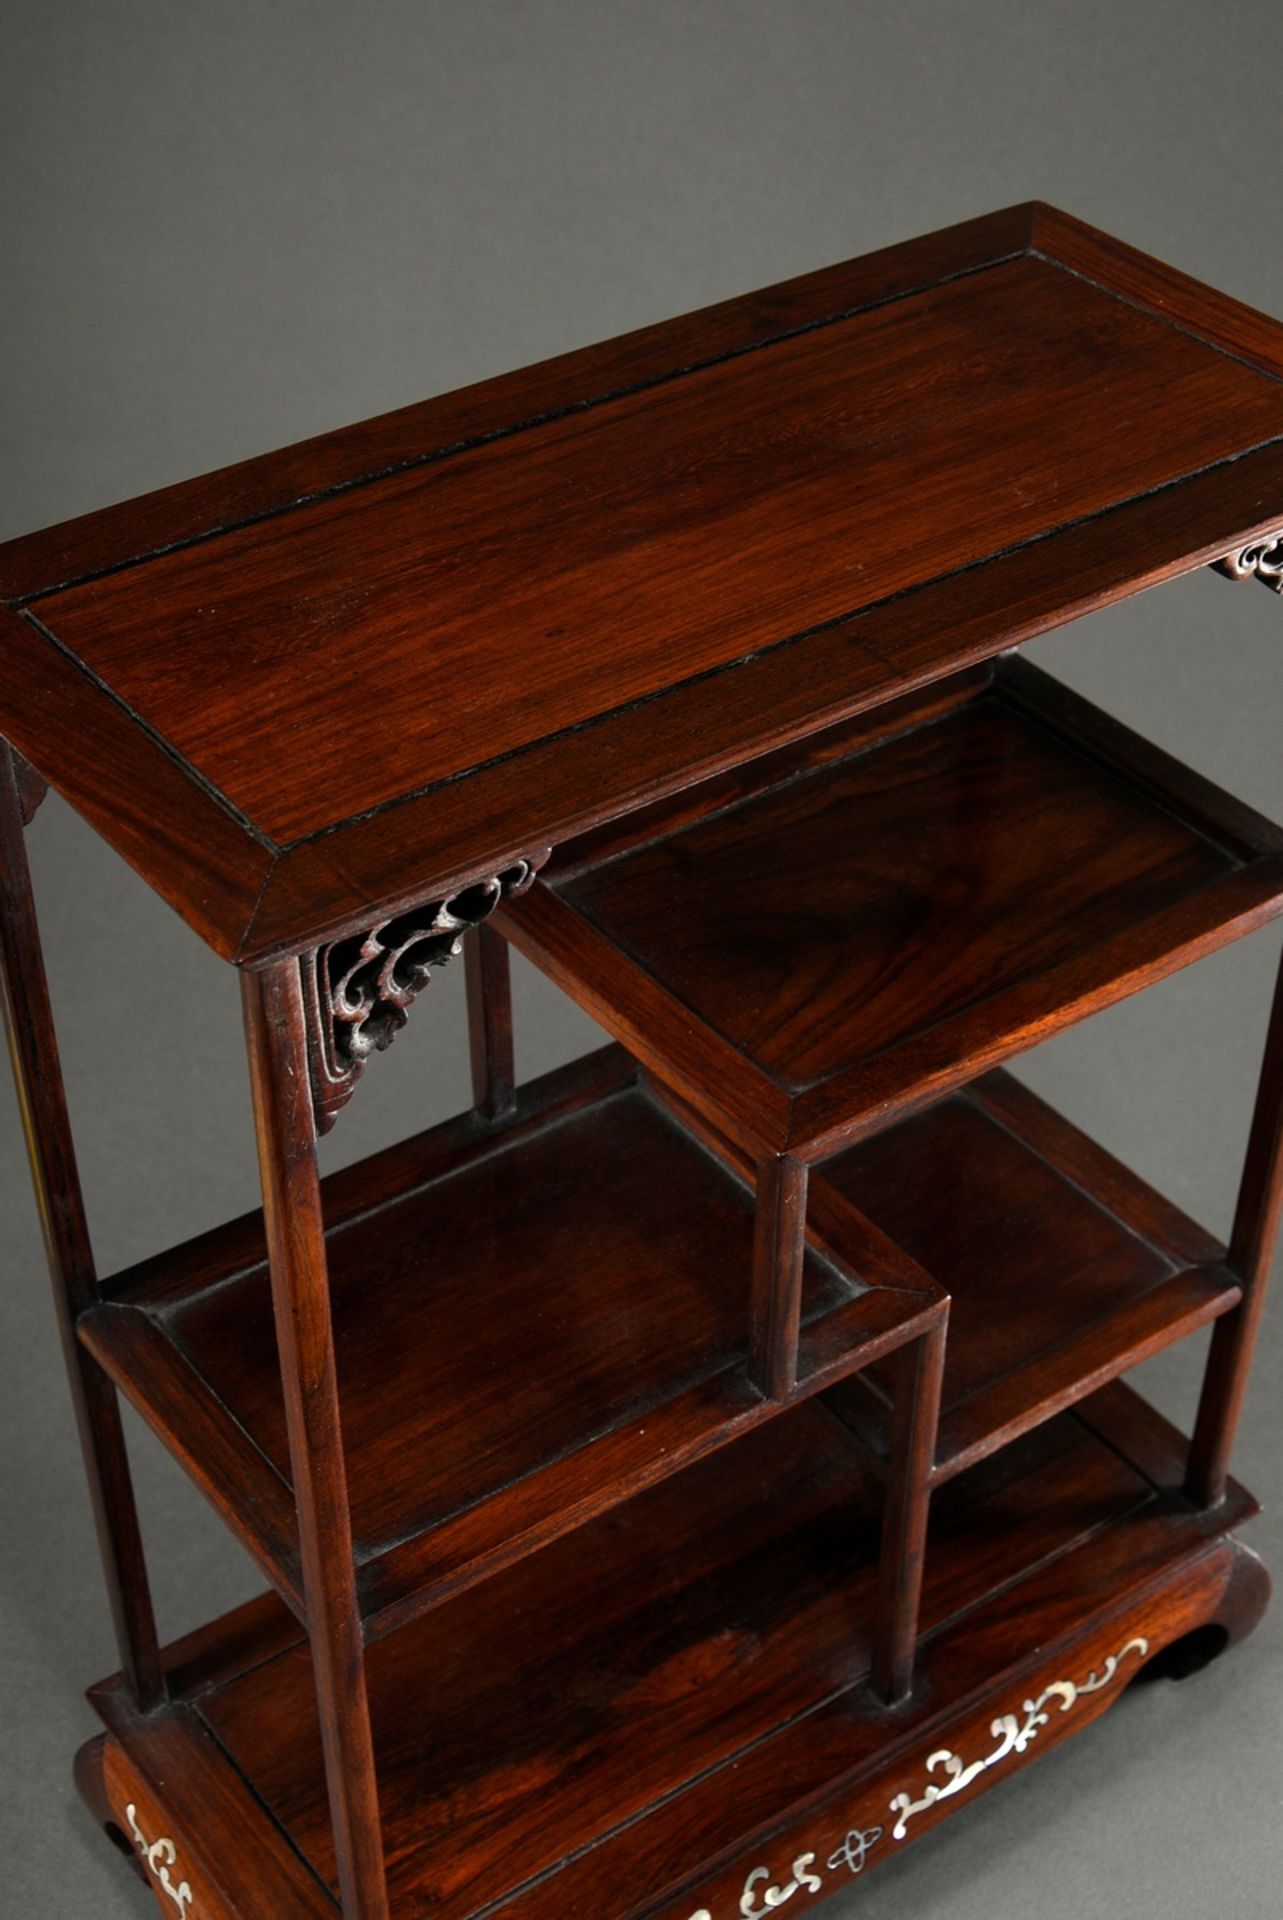 Small Chinese redwood stand with shelves in different heights and mother-of-pearl inlaid, 50x37x18c - Image 3 of 4